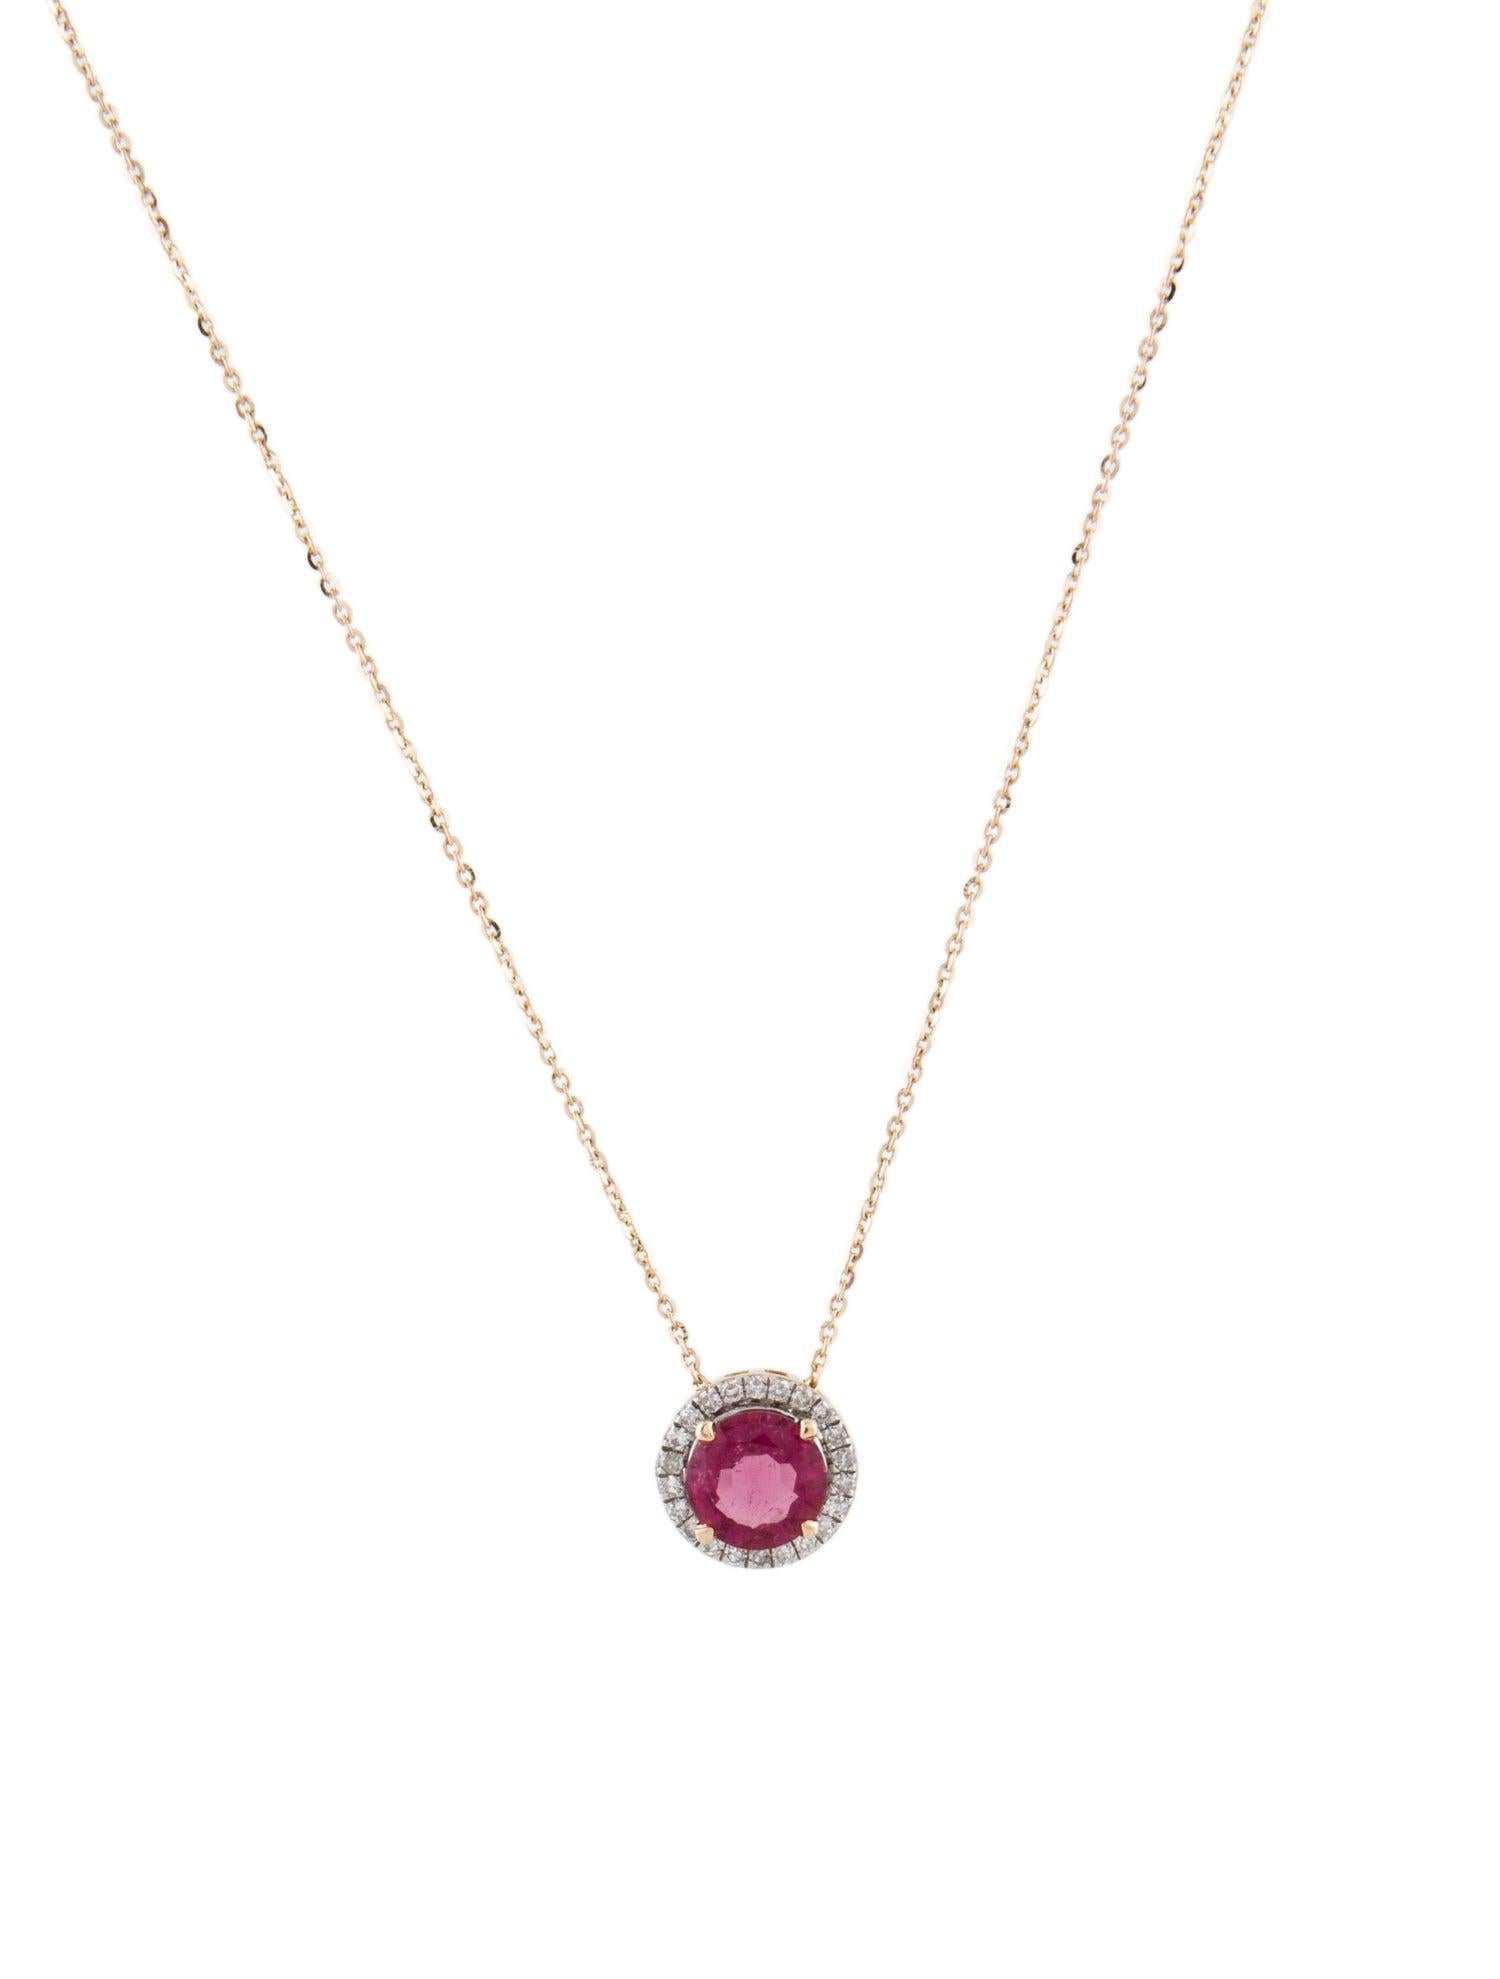 14K 1.09ct Tourmaline & Diamond Pendant Necklace: Luxury Statement Jewelry Piece In New Condition For Sale In Holtsville, NY